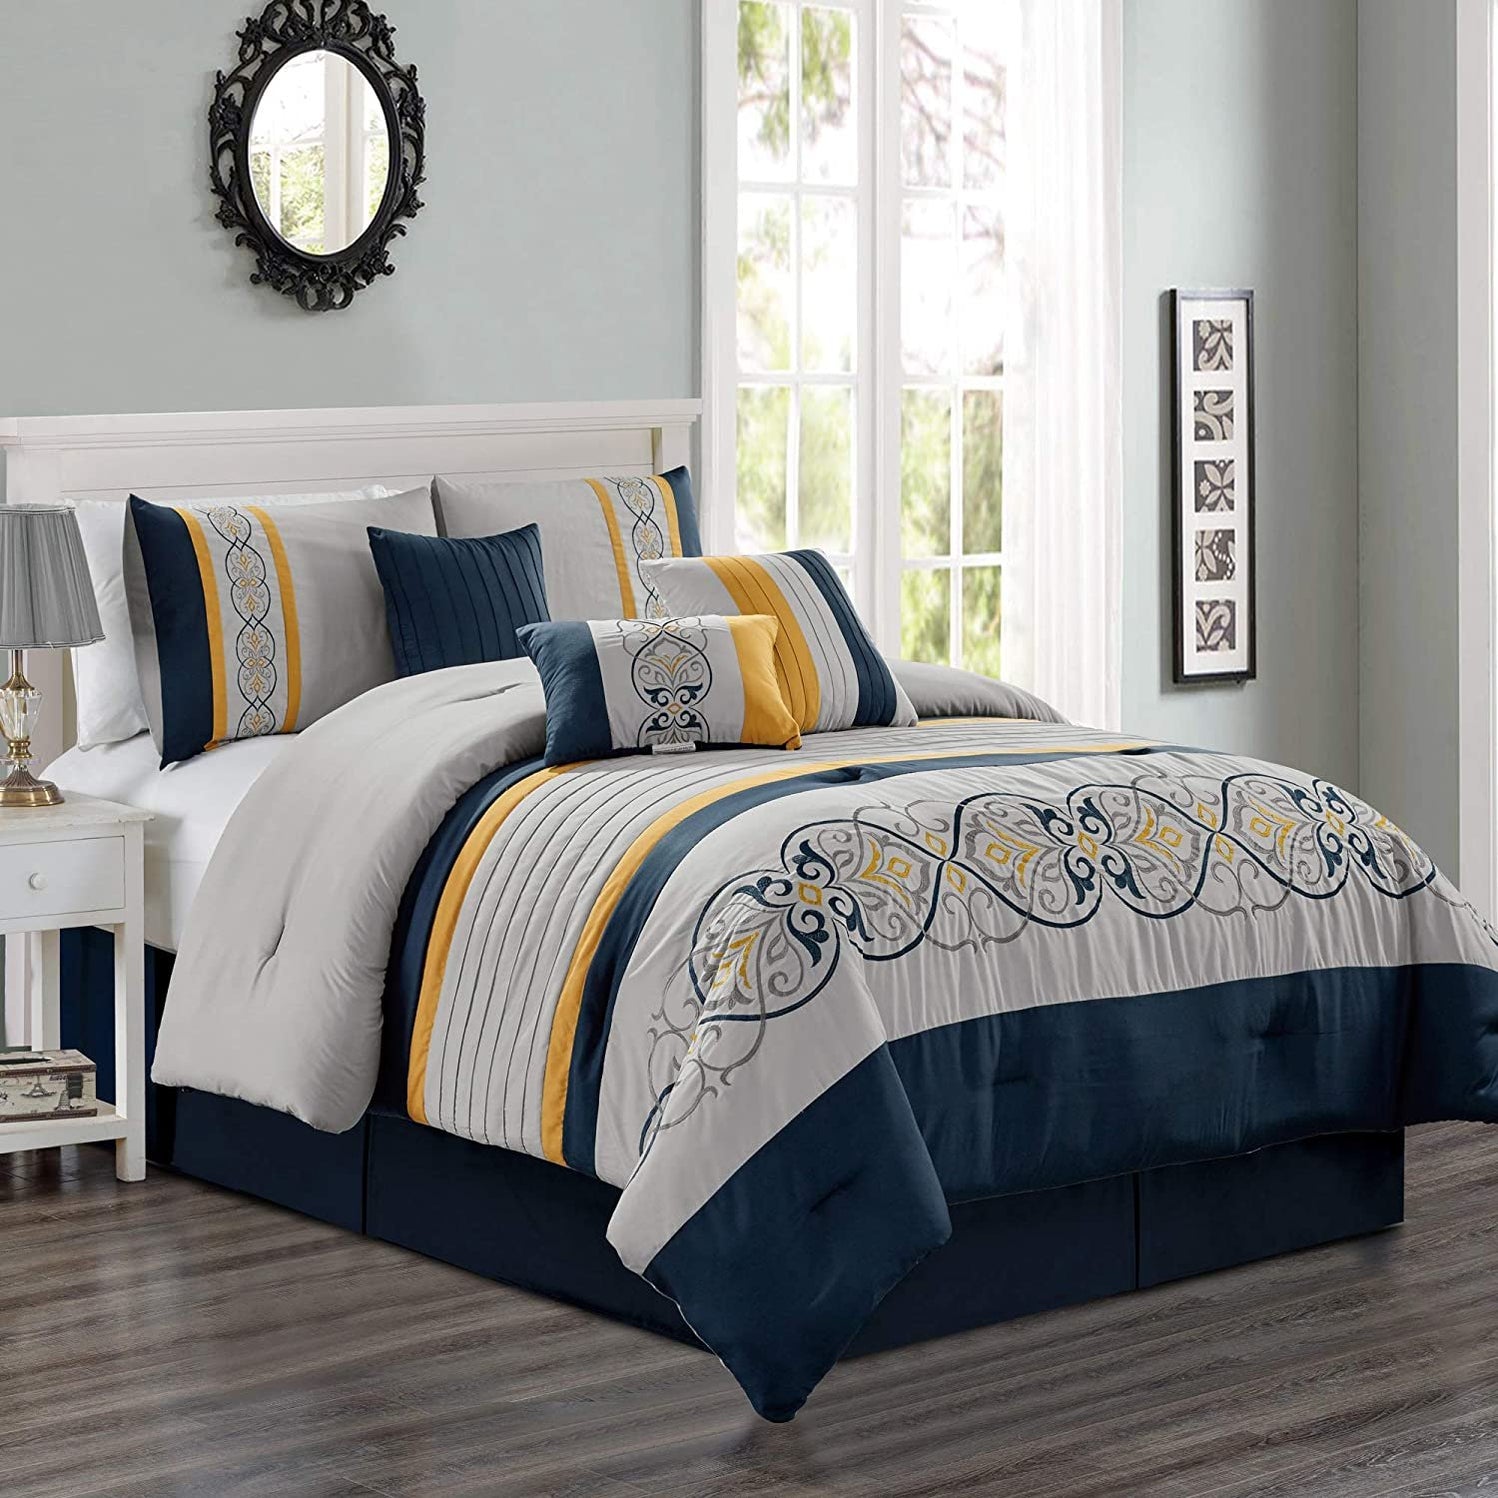 Sapphire Home Luxury 7 Piece Fullqueen Comforter Set With Shams Bed S — Sapphire Home Goods 